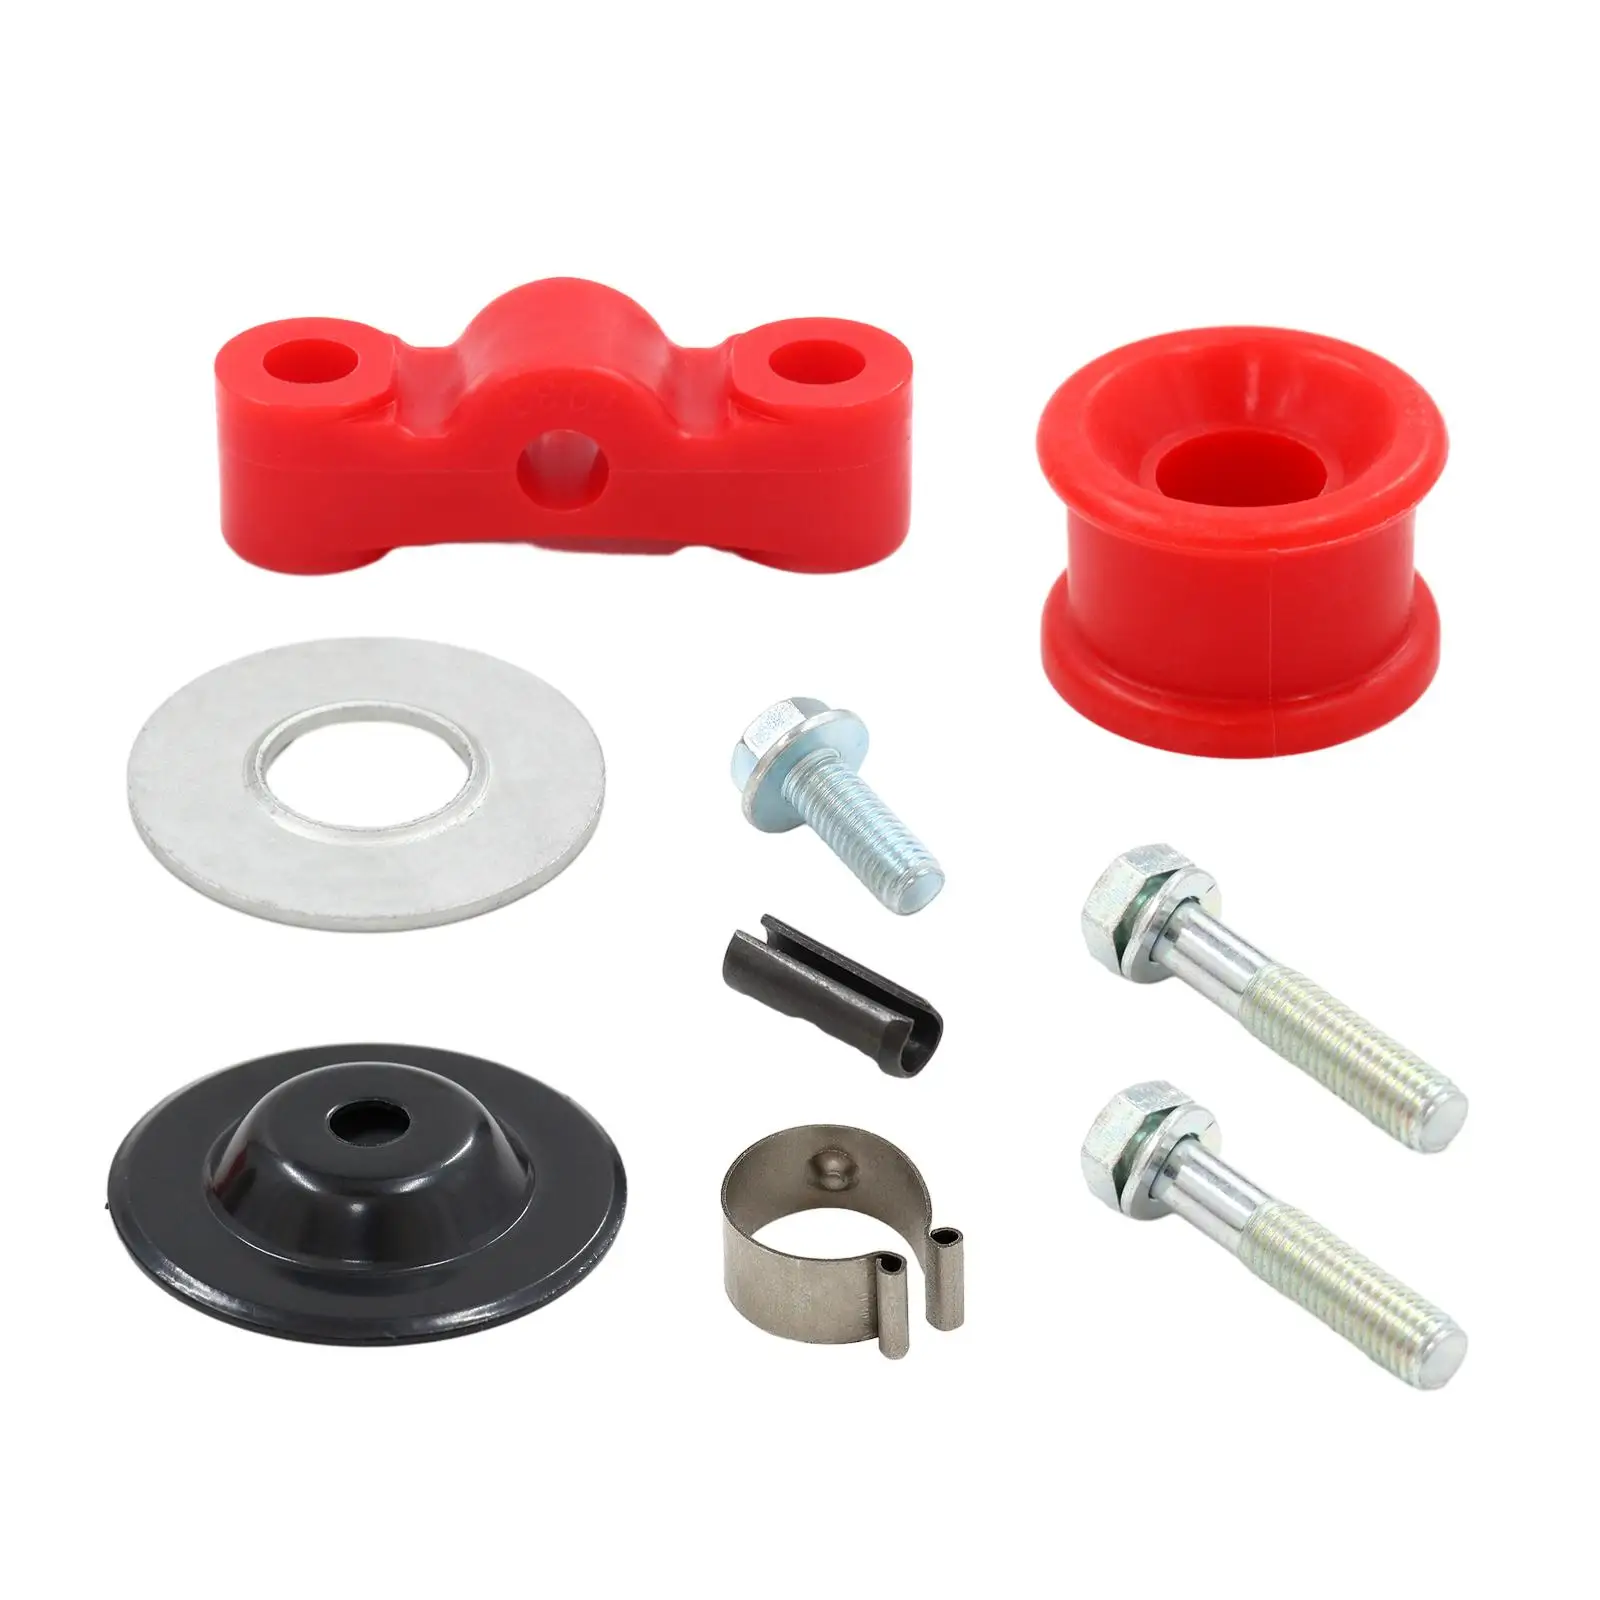 Red Shift Linkage Bushings Kit Replaces Auto Accessories C Clip and Bolt for Honda Civic Crx with B Series Swap Heavy Duty